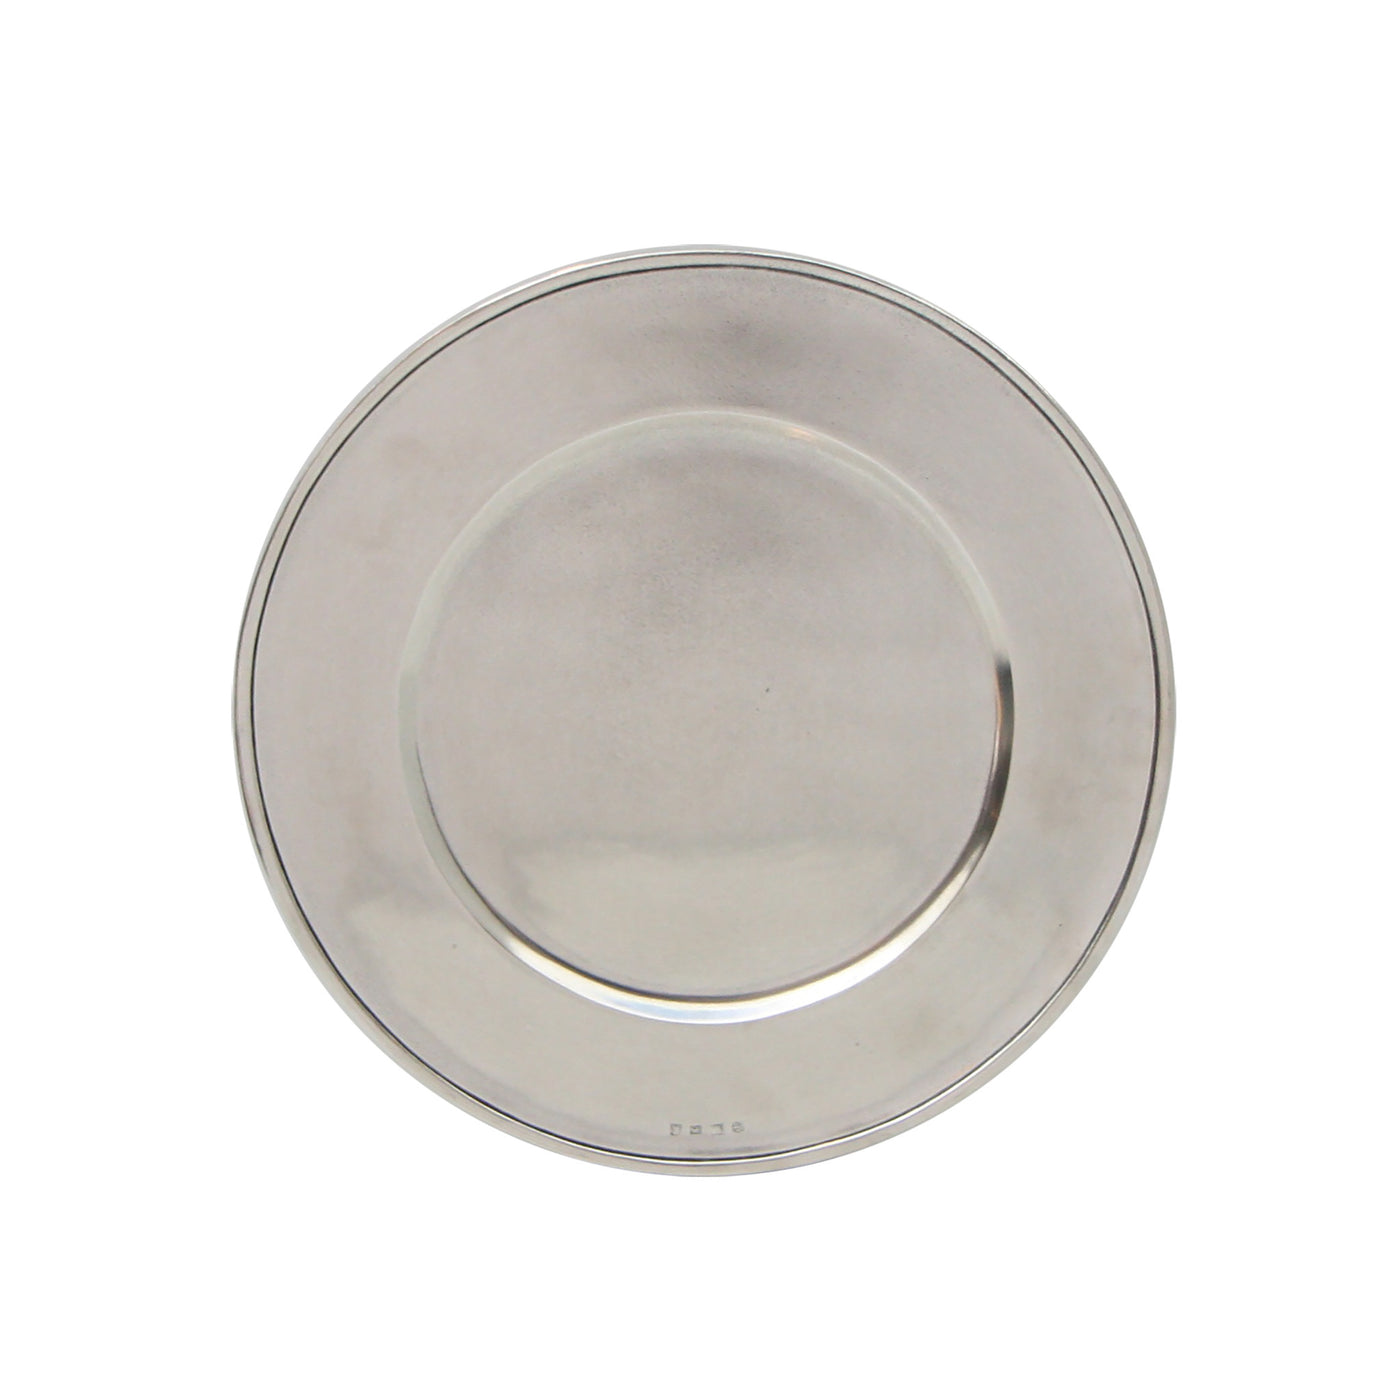 Match - Pewter Convivio Charger